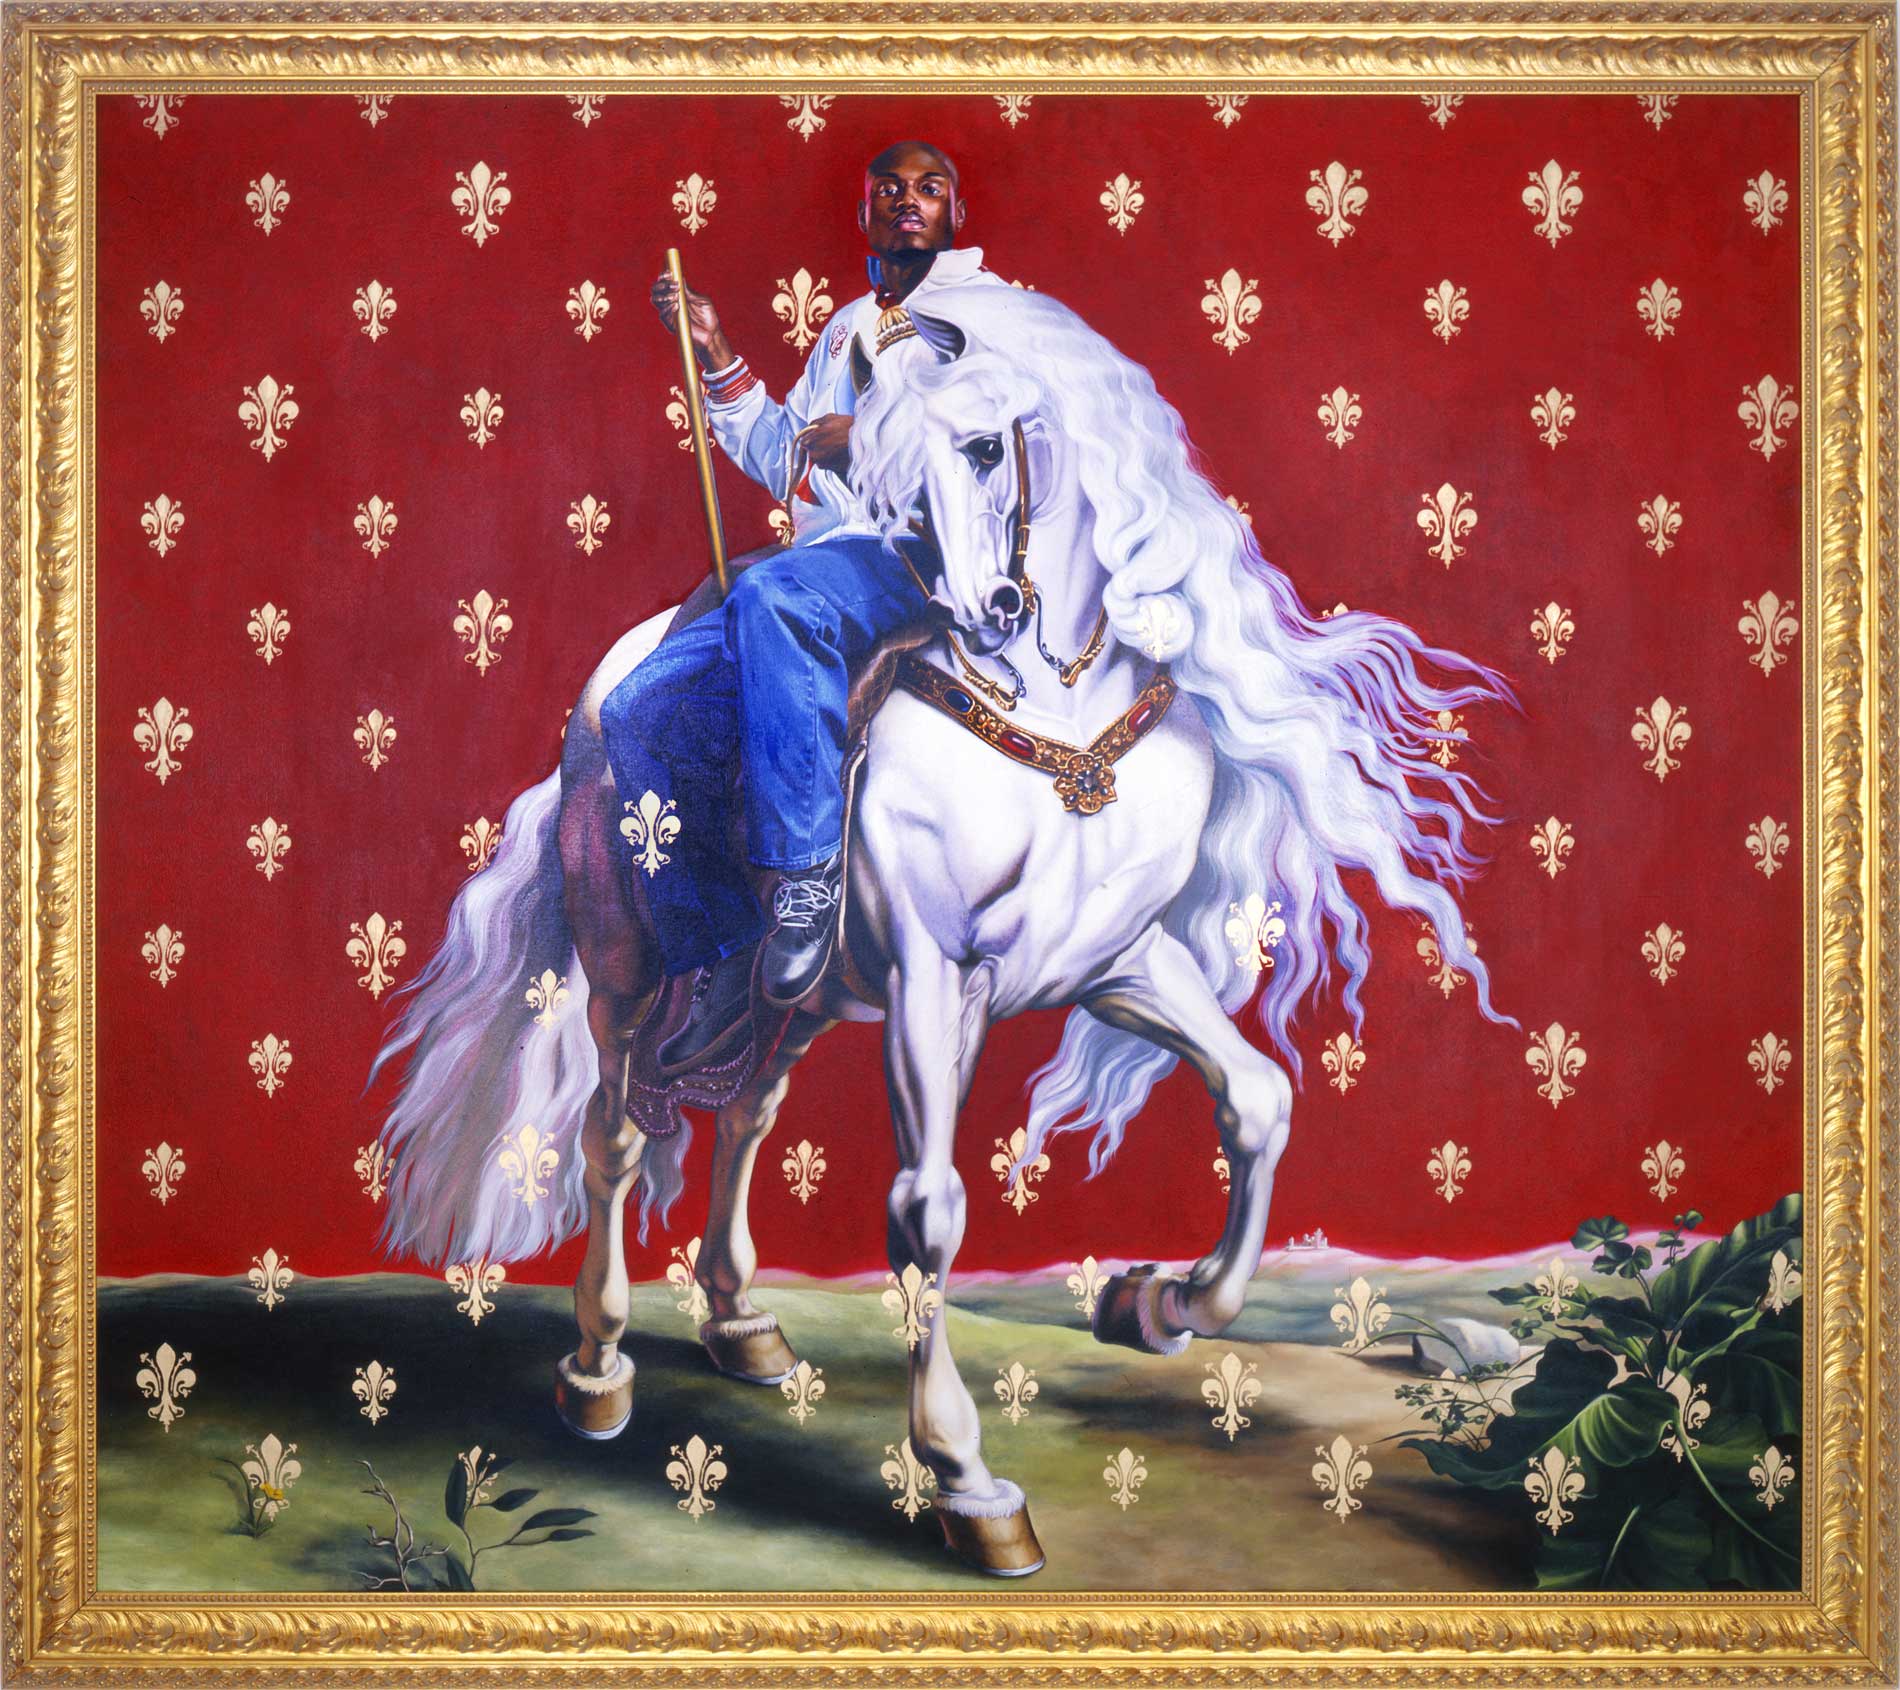 Kehinde Wiley | Rumors of War | The Capture of Juliers, 2006 Oil and Enamel on Canvas.  | 3